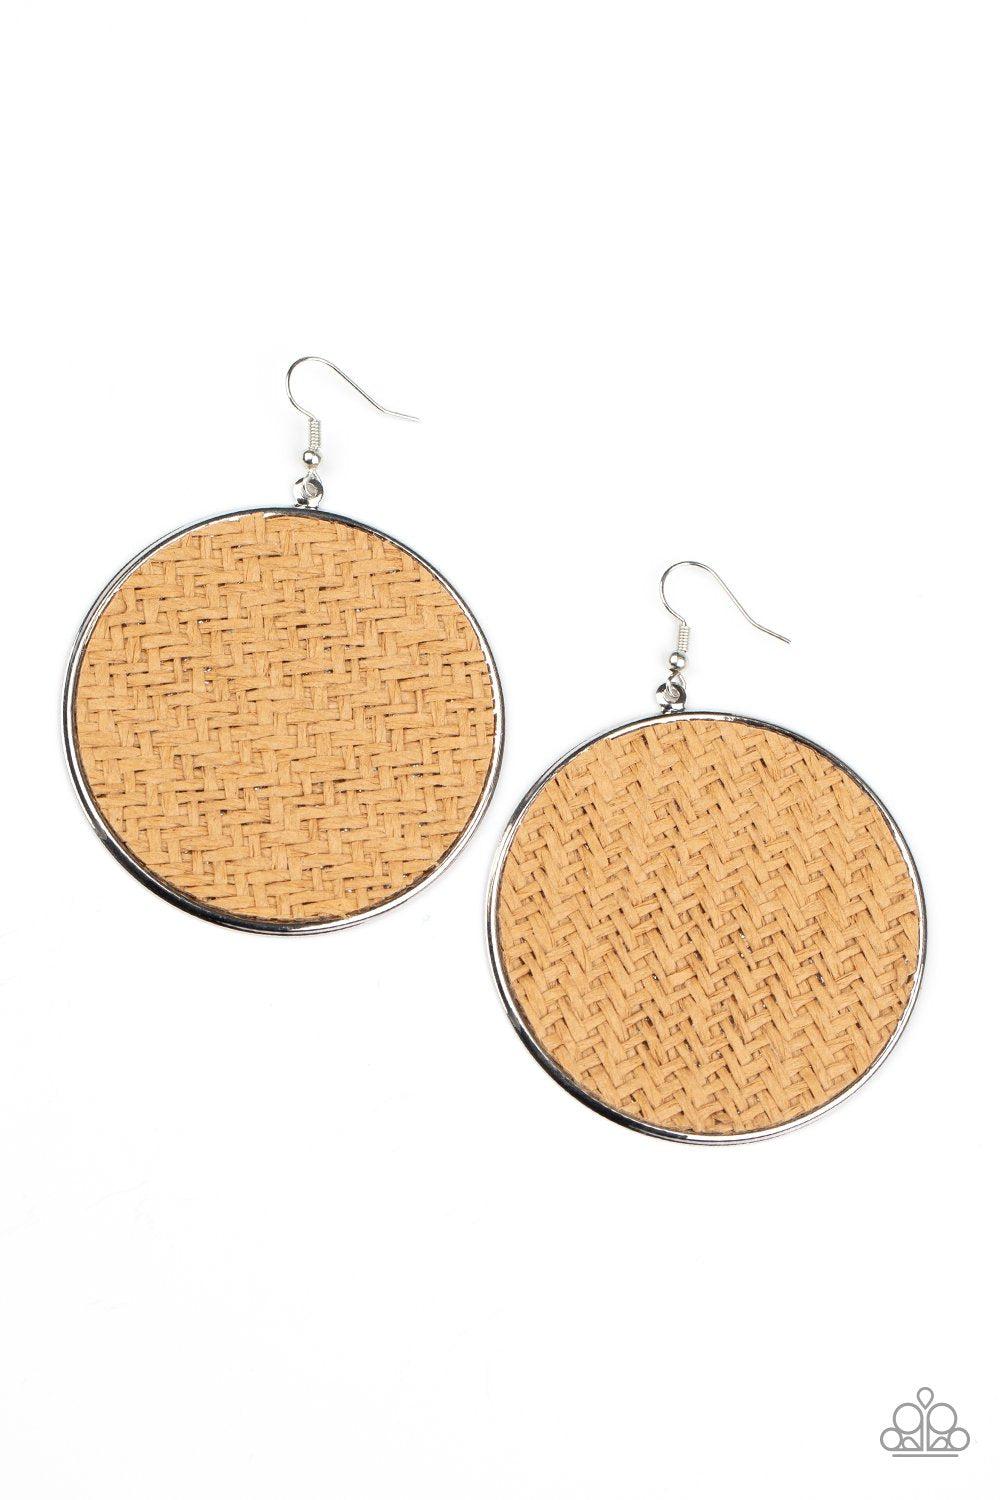 Wonderfully Woven Brown Weave Earrings - Paparazzi Accessories-CarasShop.com - $5 Jewelry by Cara Jewels